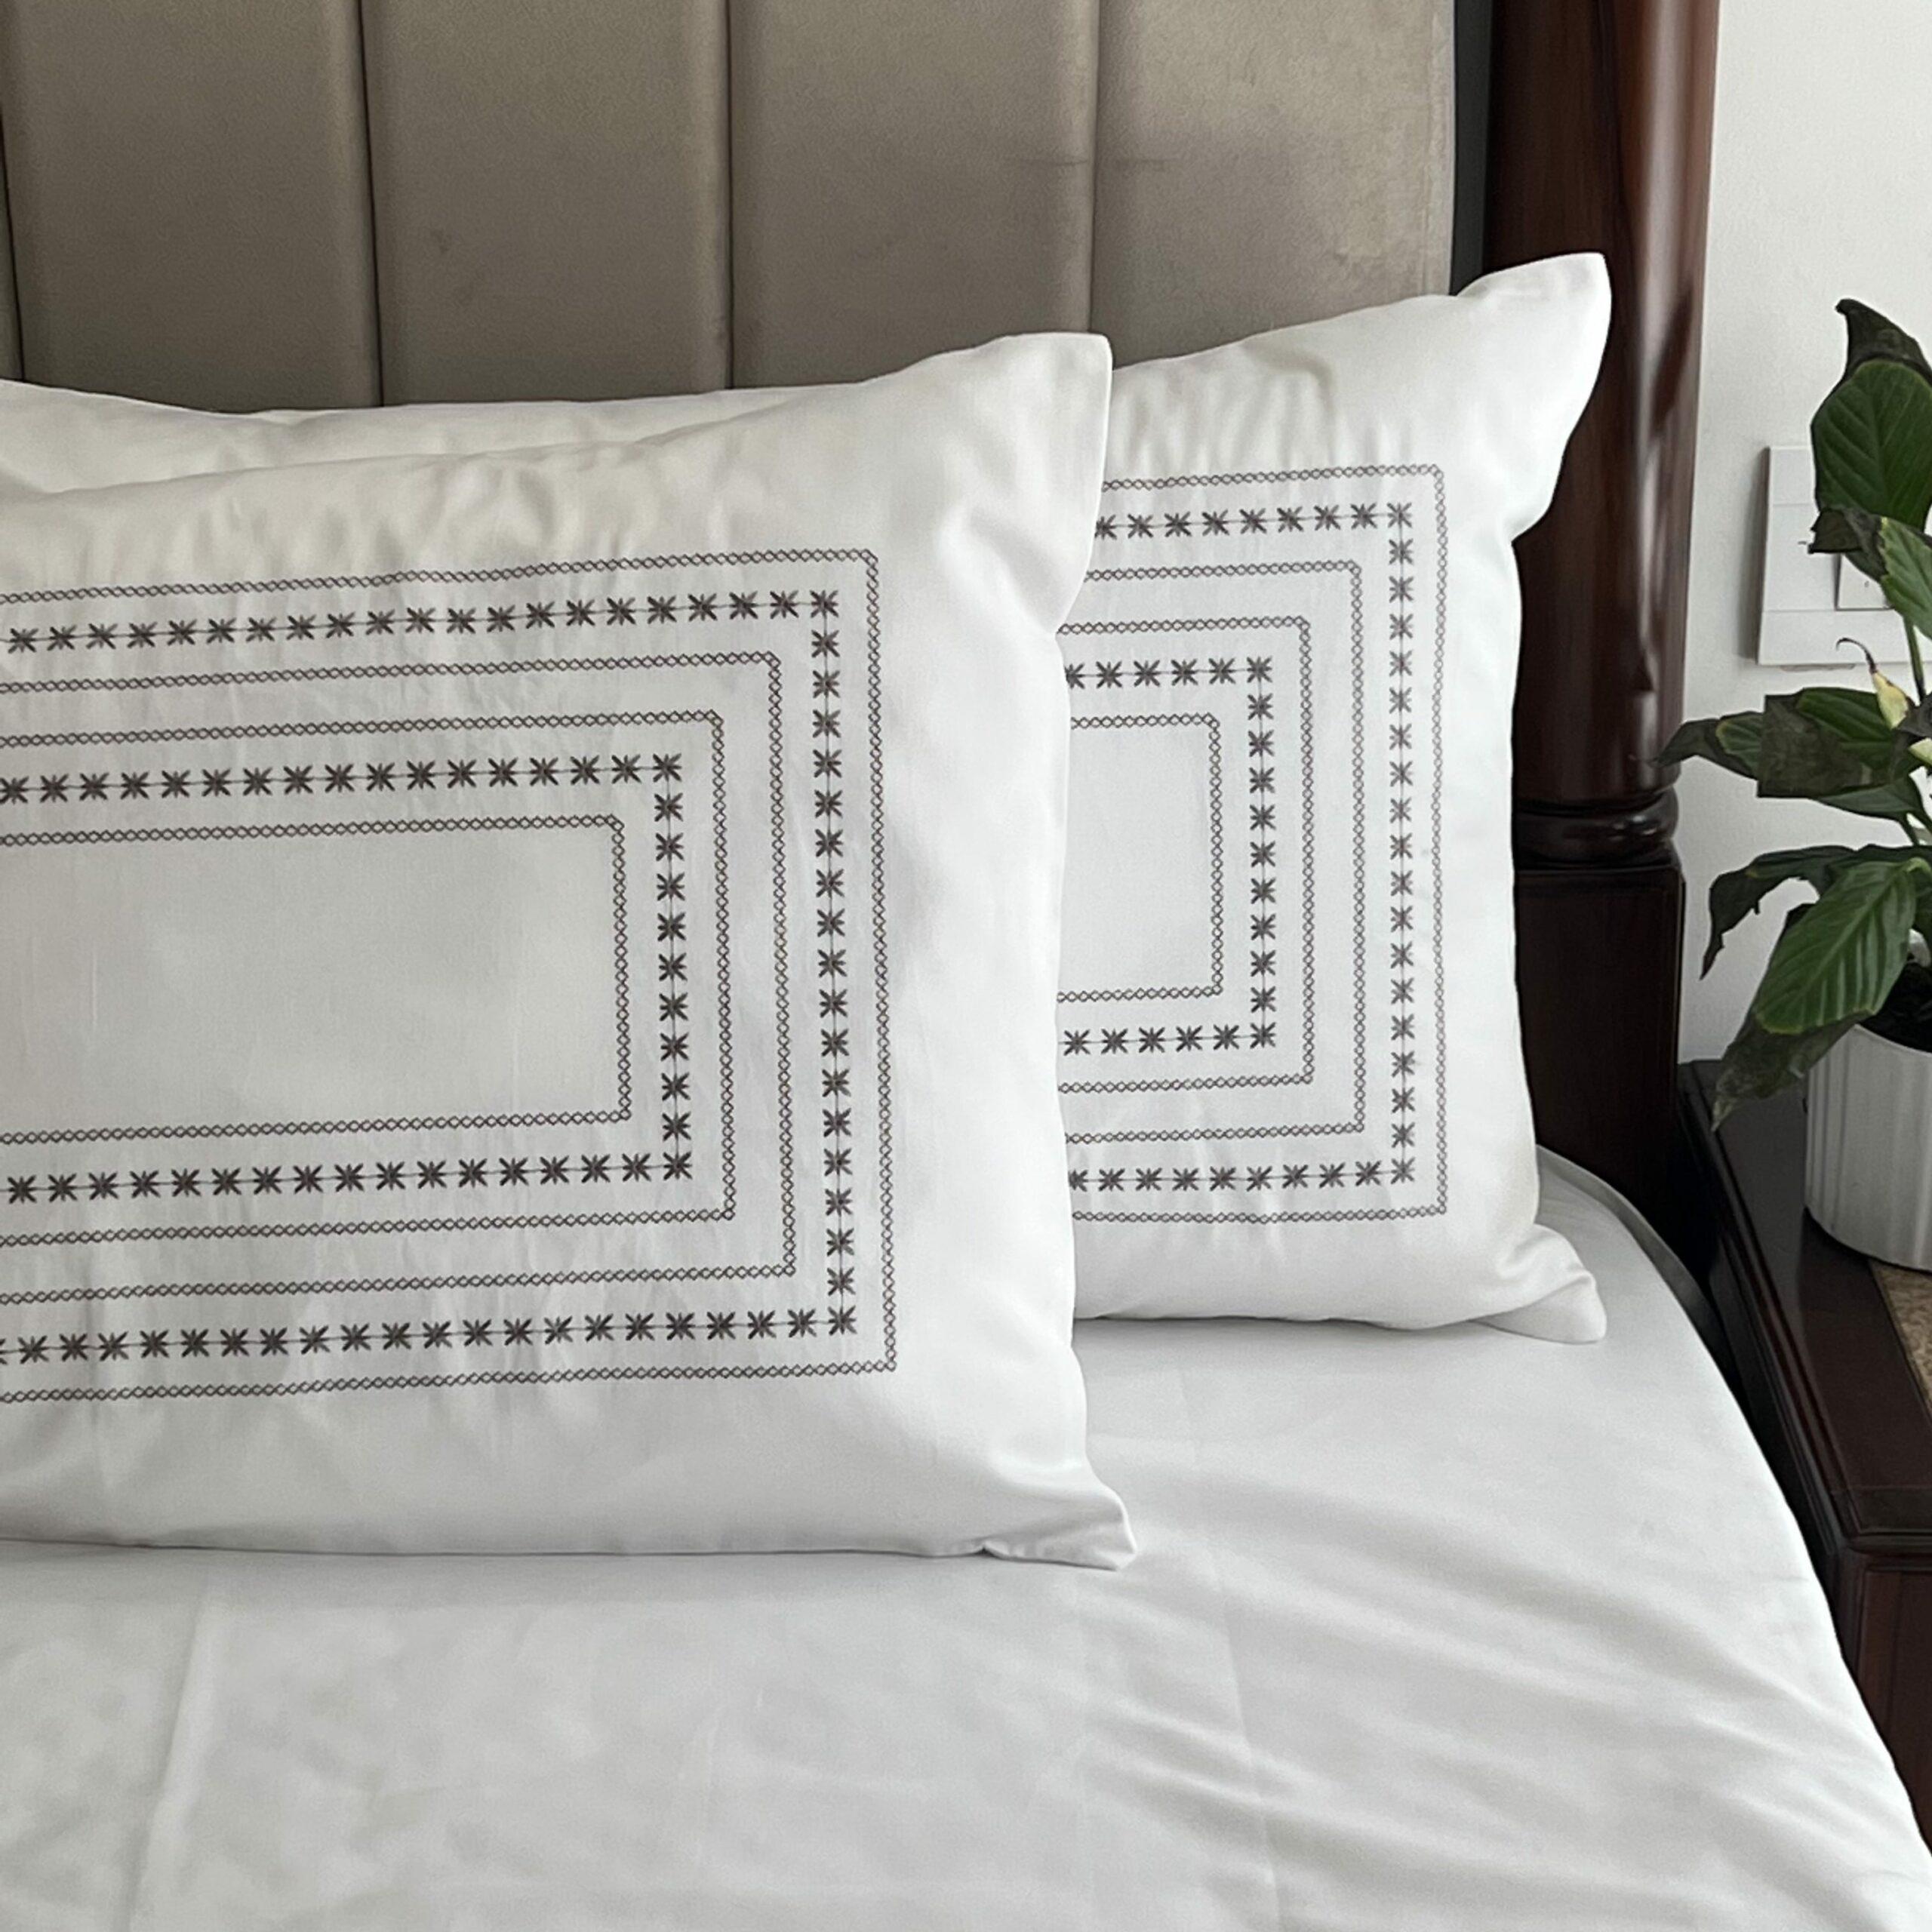 Minisol White Pillow Covers (Set of 2)